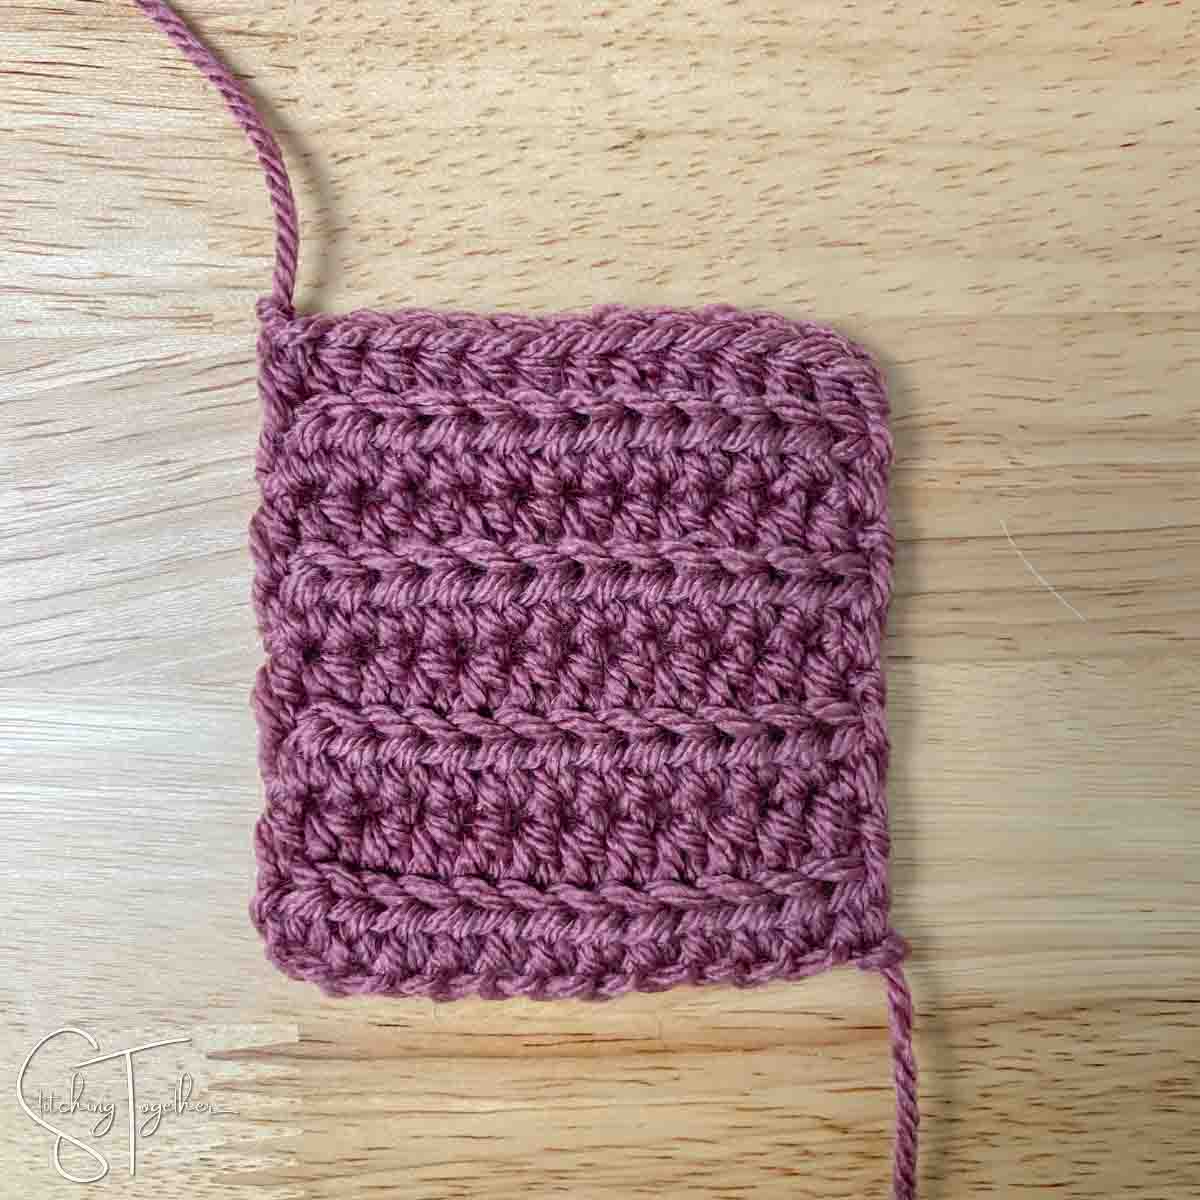 crochet swatch of back loop only hdc